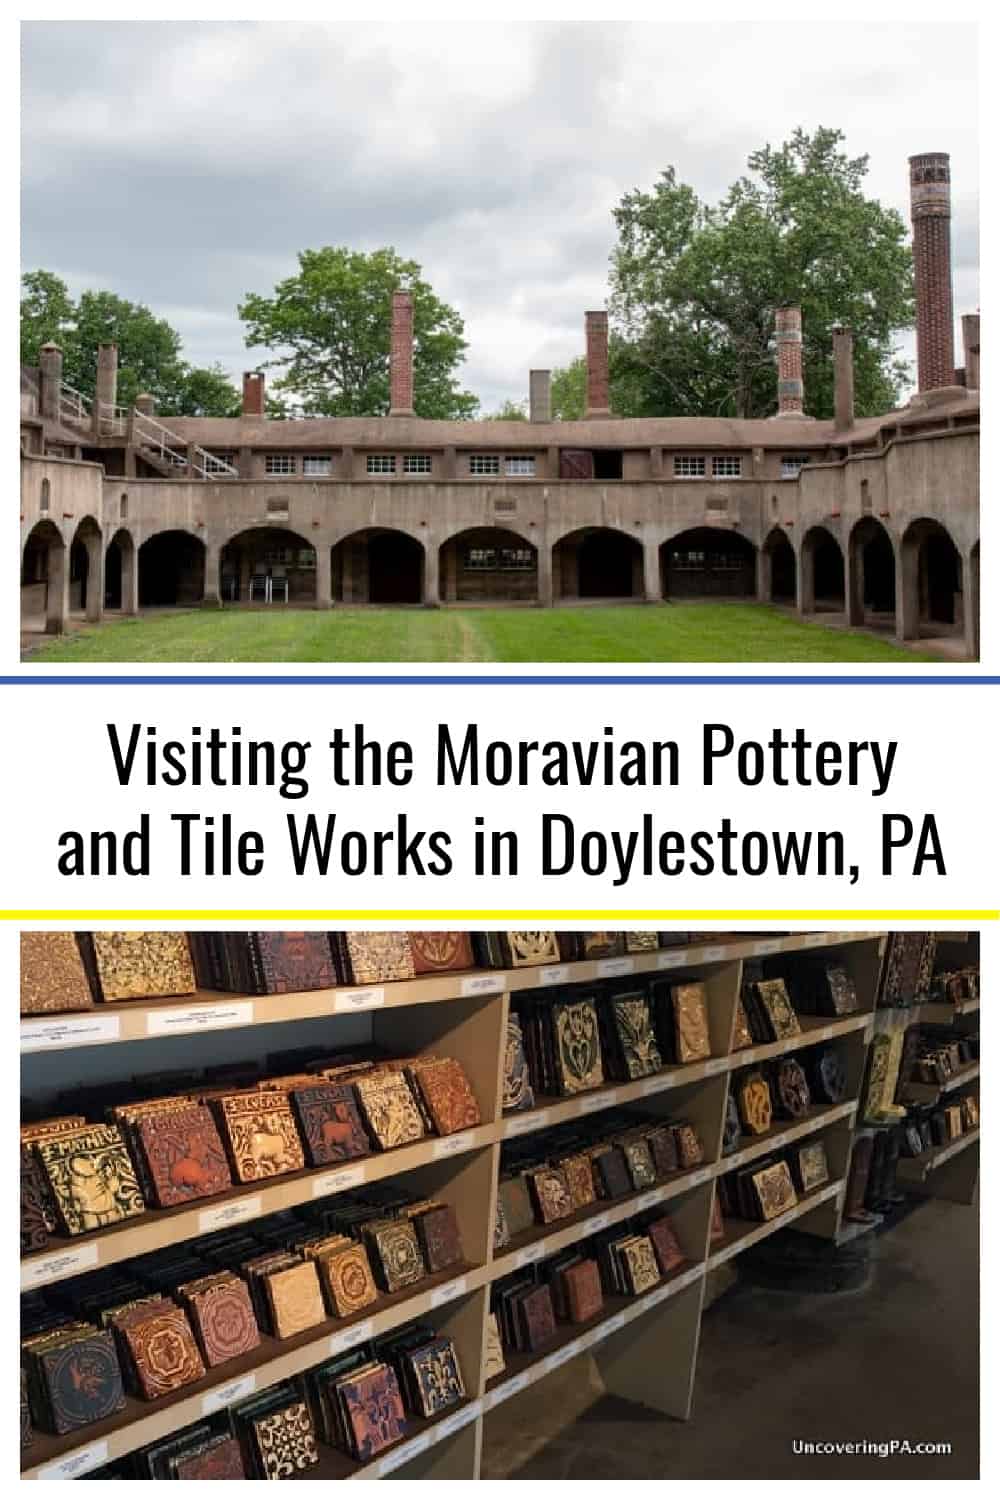 Visiting the Moravian Pottery and Tile Works in Doylestown